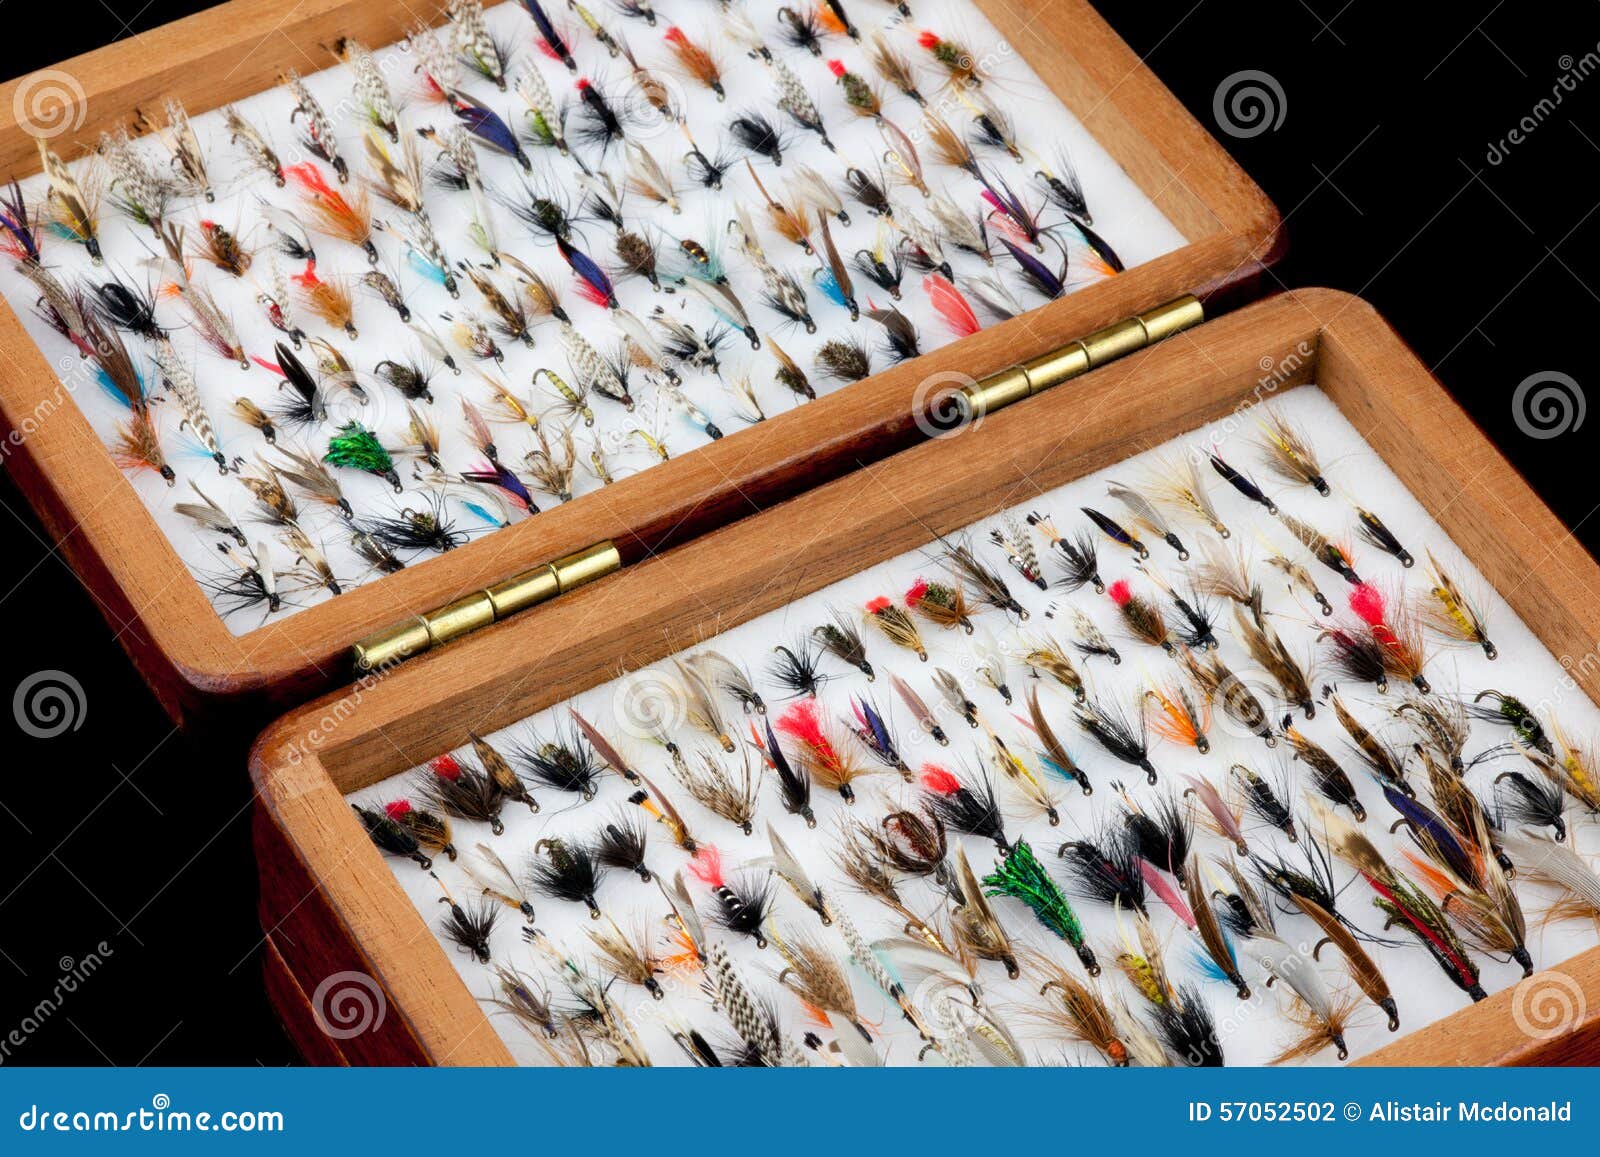 Trout Fishing Flies in Old Wooden Fly Box Stock Photo - Image of salmon,  loch: 57052502